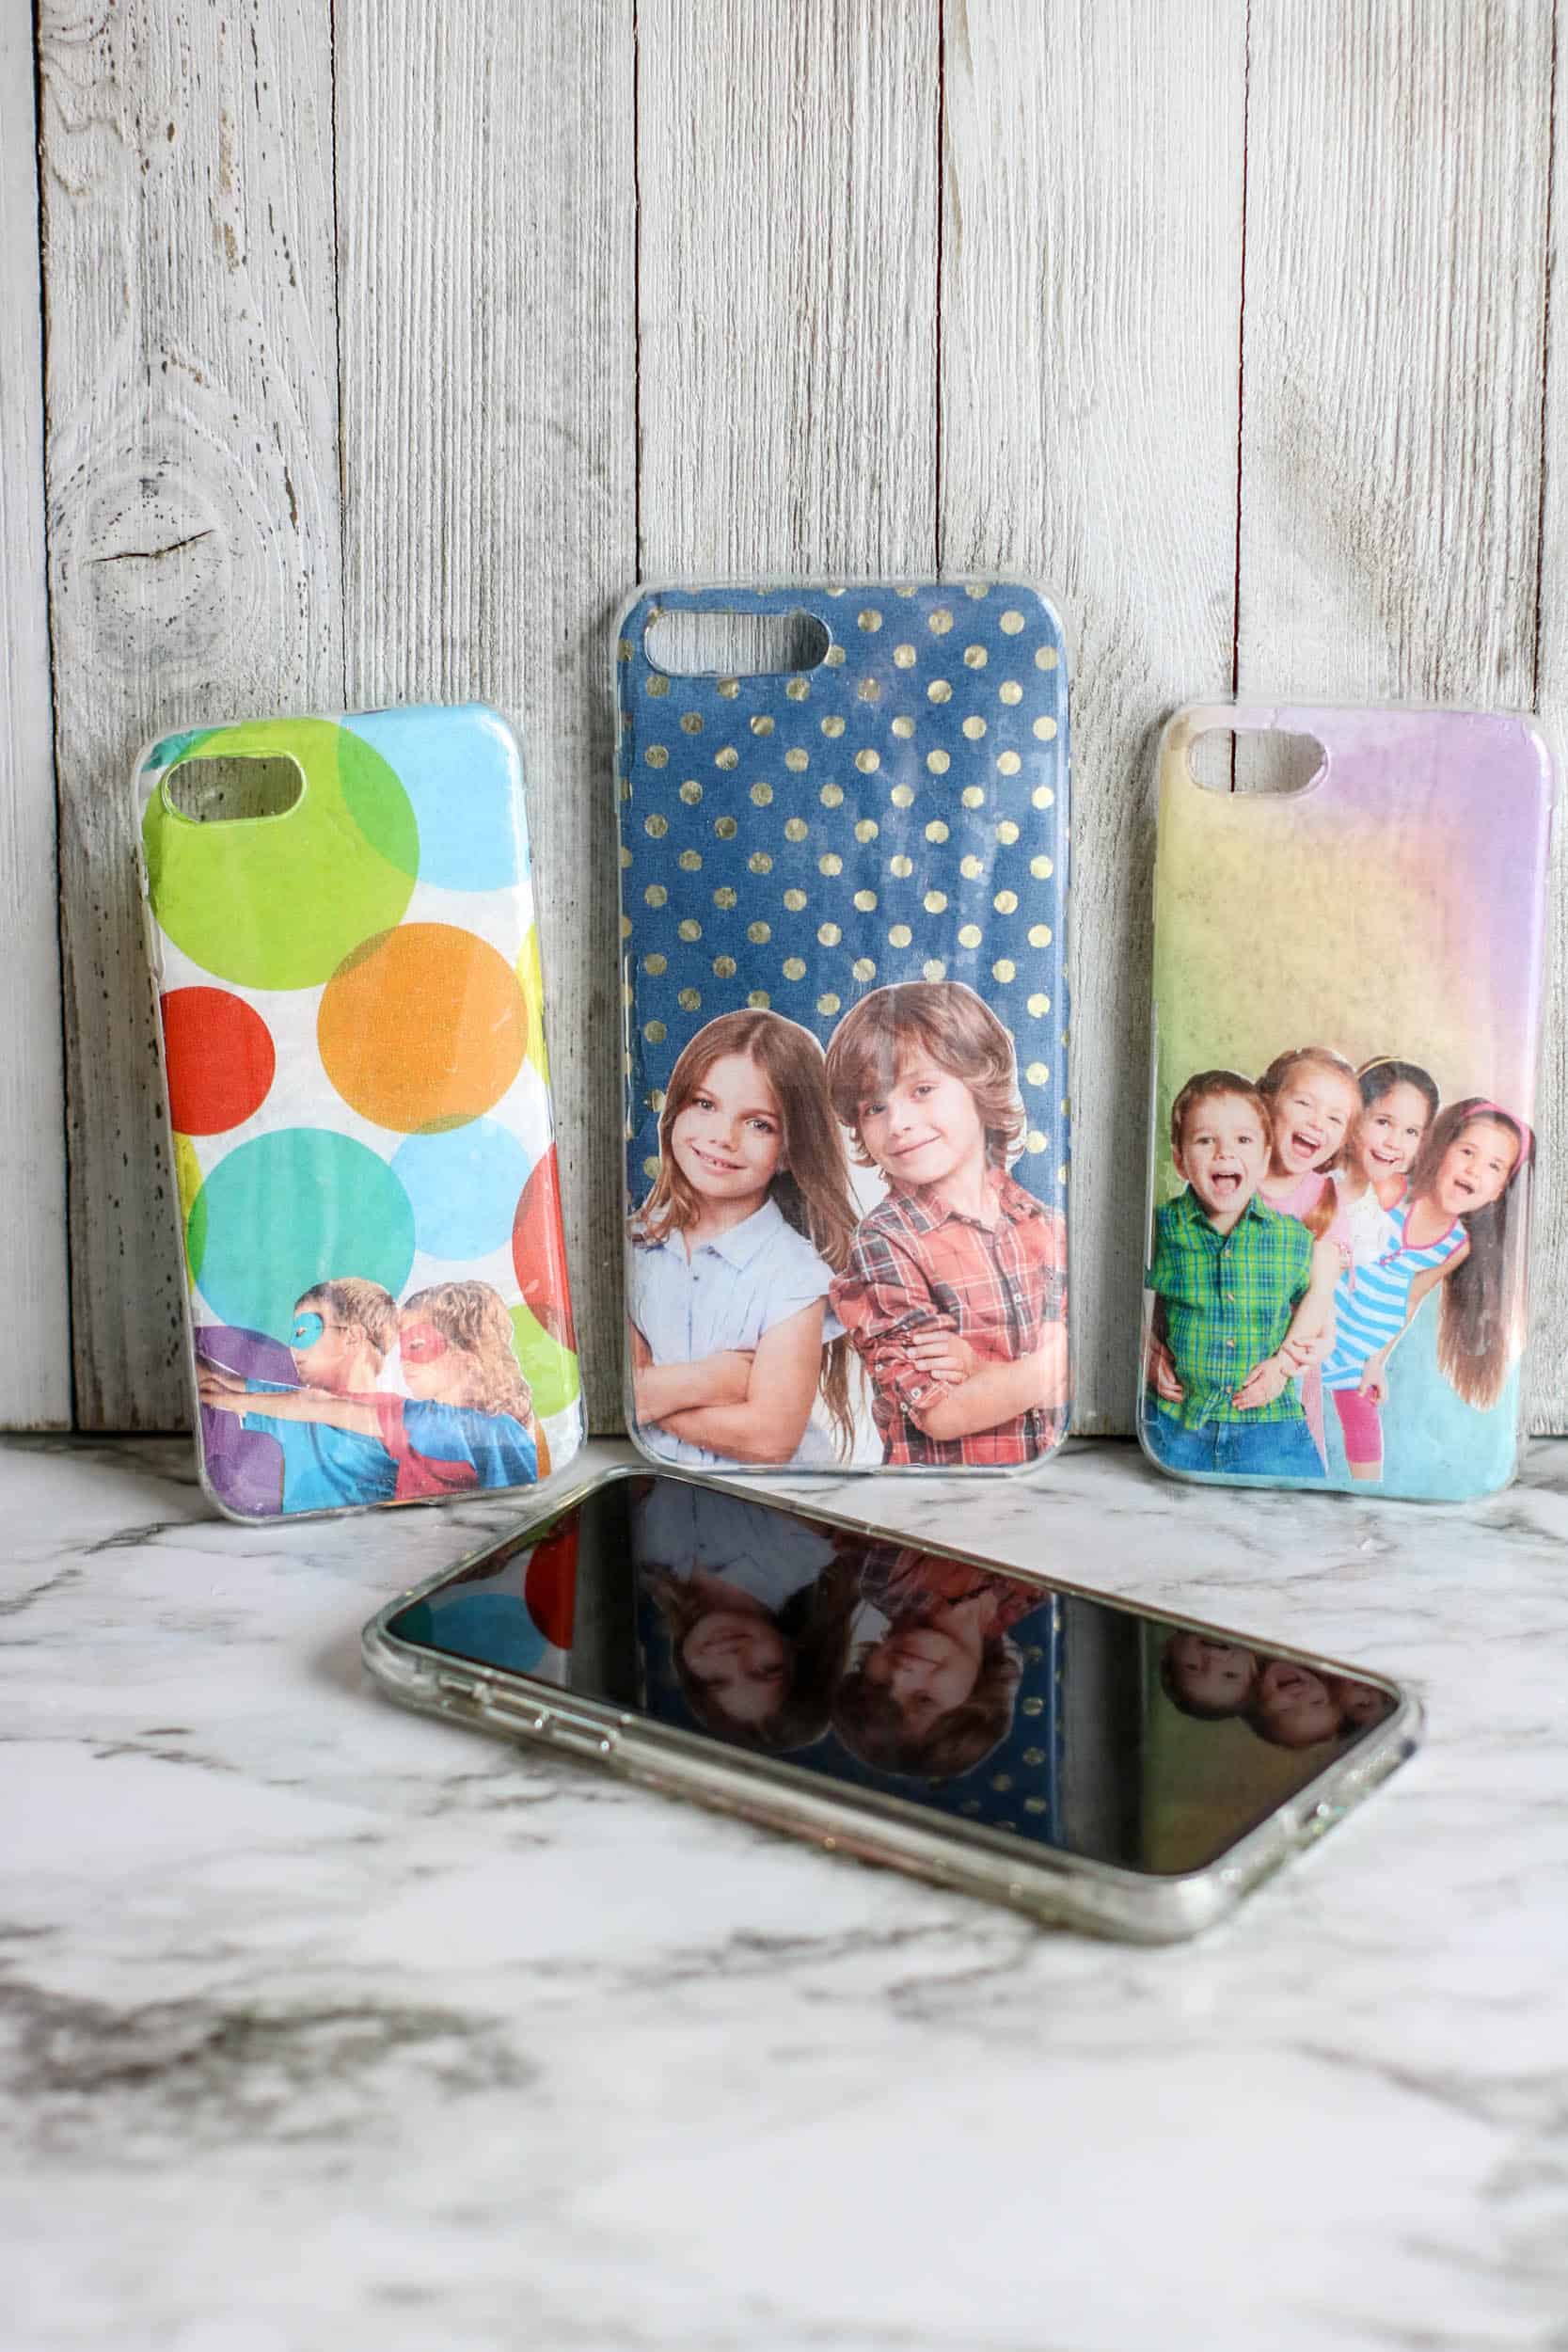 Peronalized cell phone cases